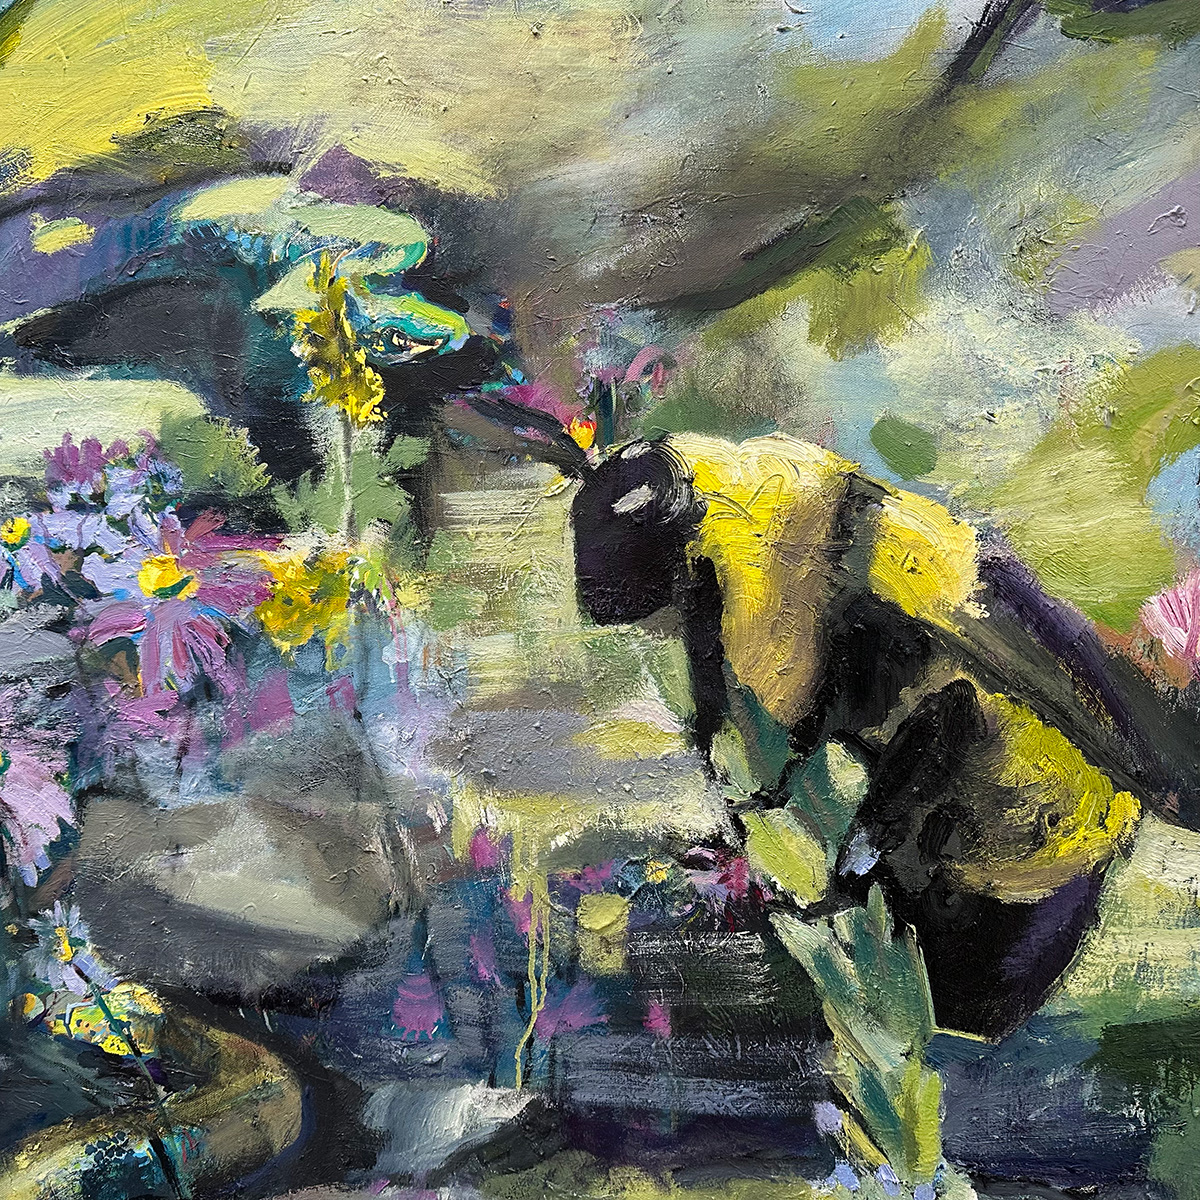 Bumble bee painting by Joe Maurer